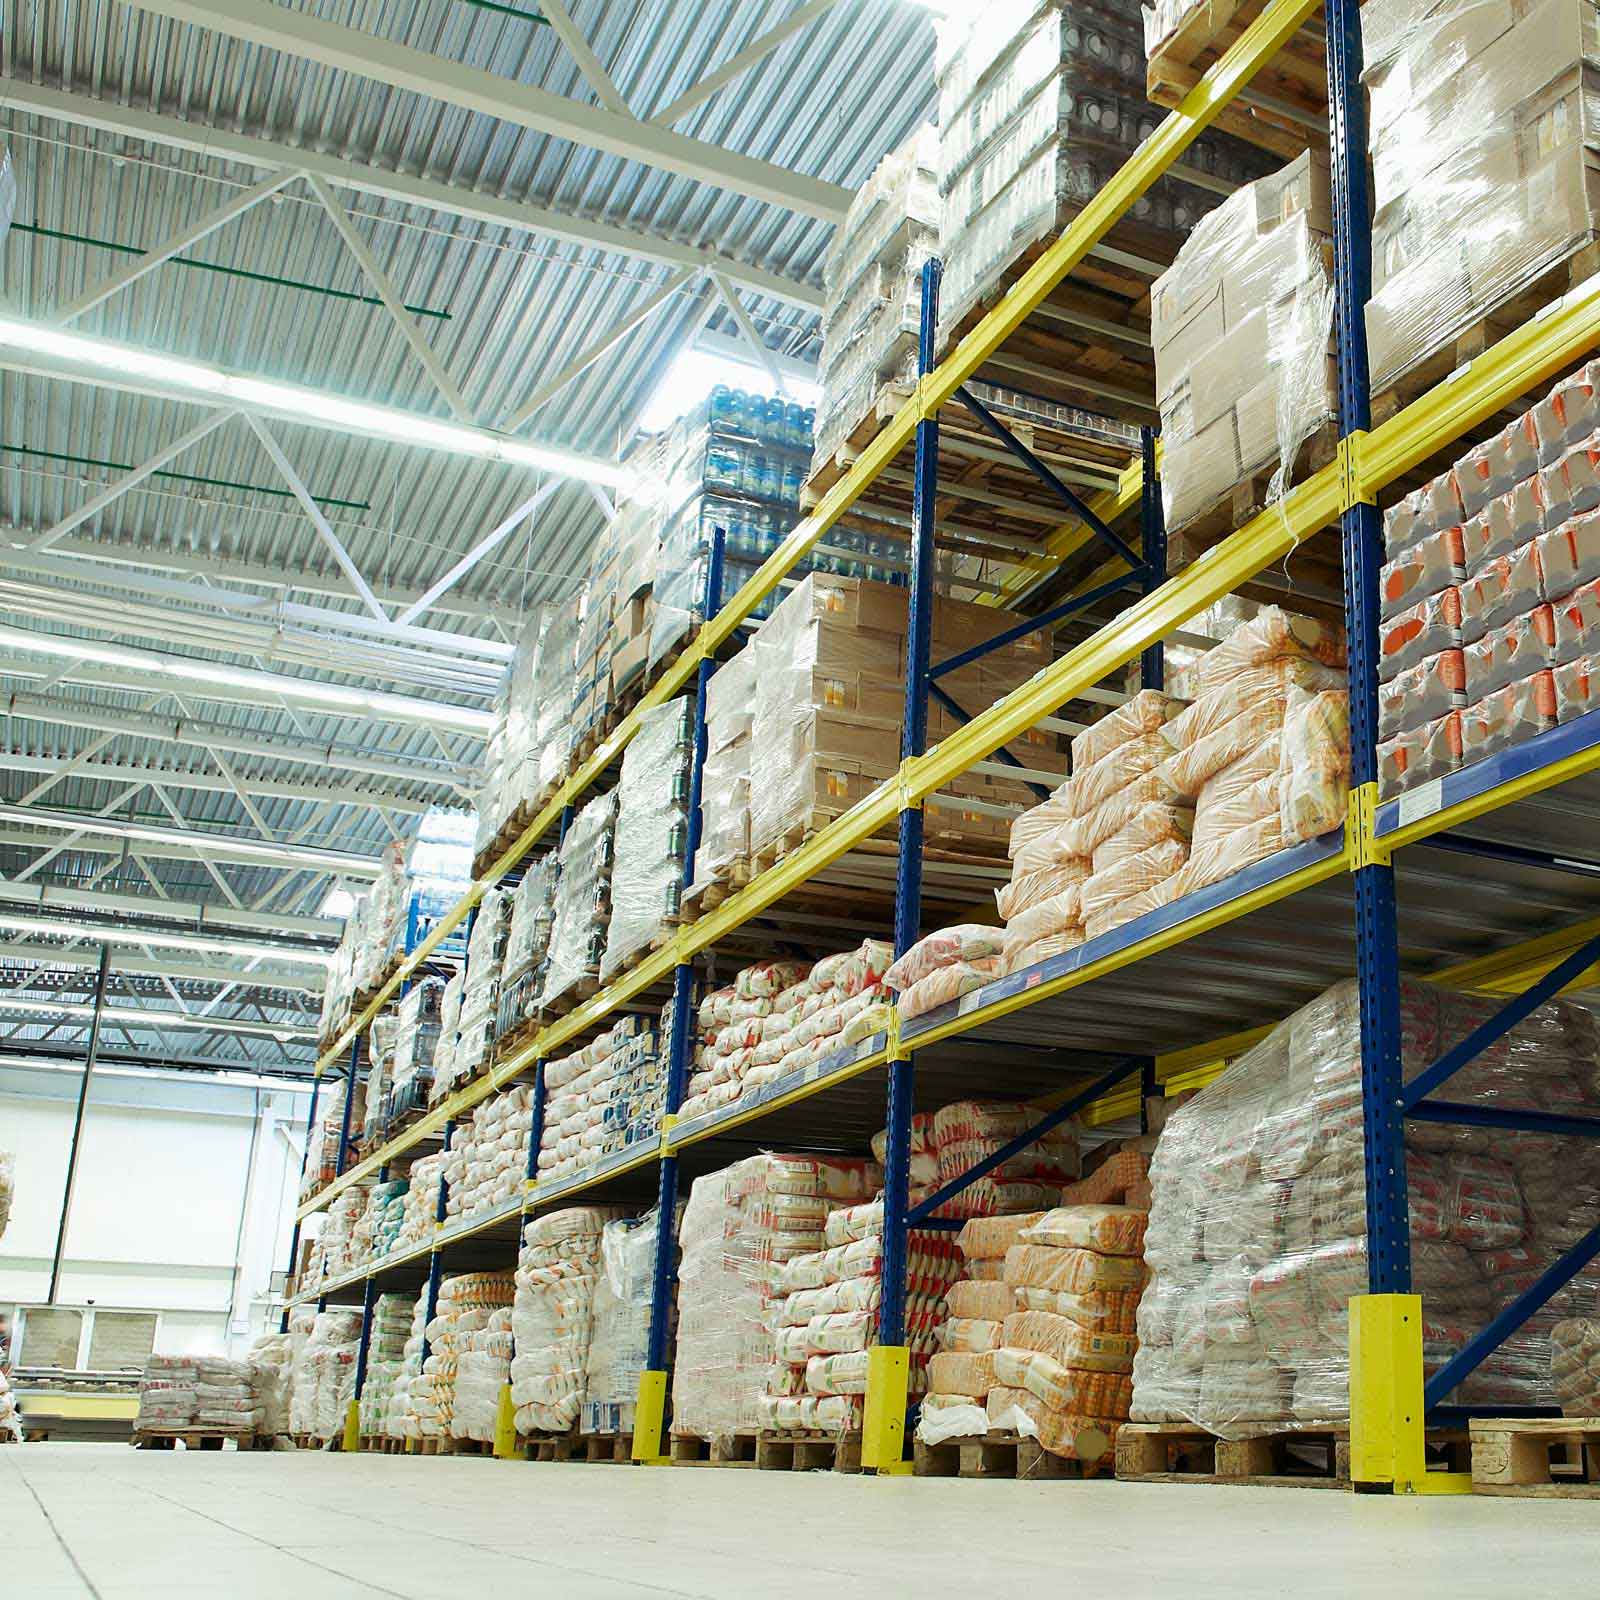 A warehouse of food ingredients